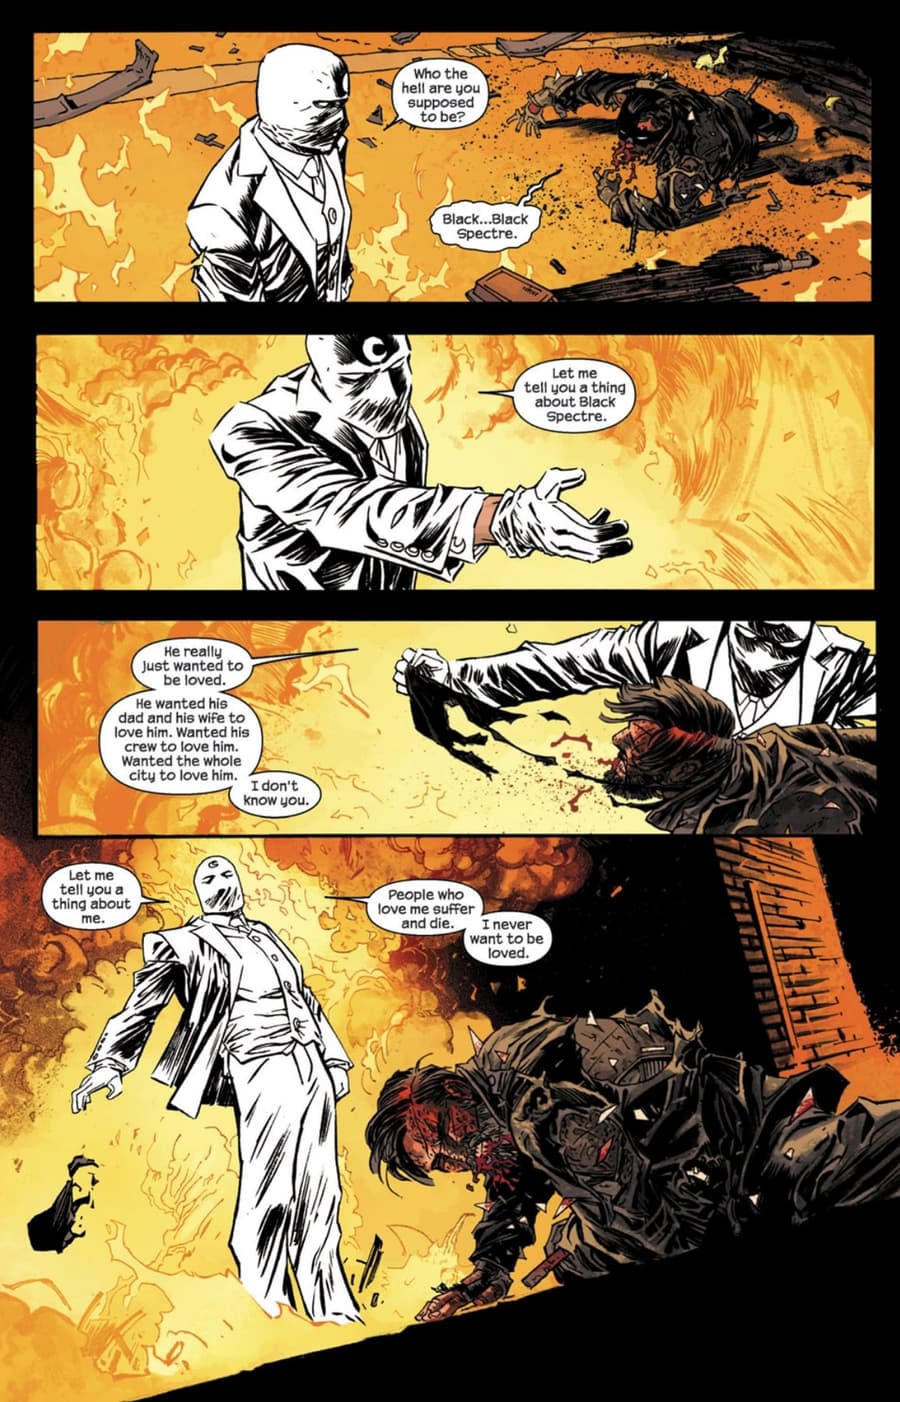 MOON KNIGHT (2014) #6 page by Warren Ellis and Declan Shalvey